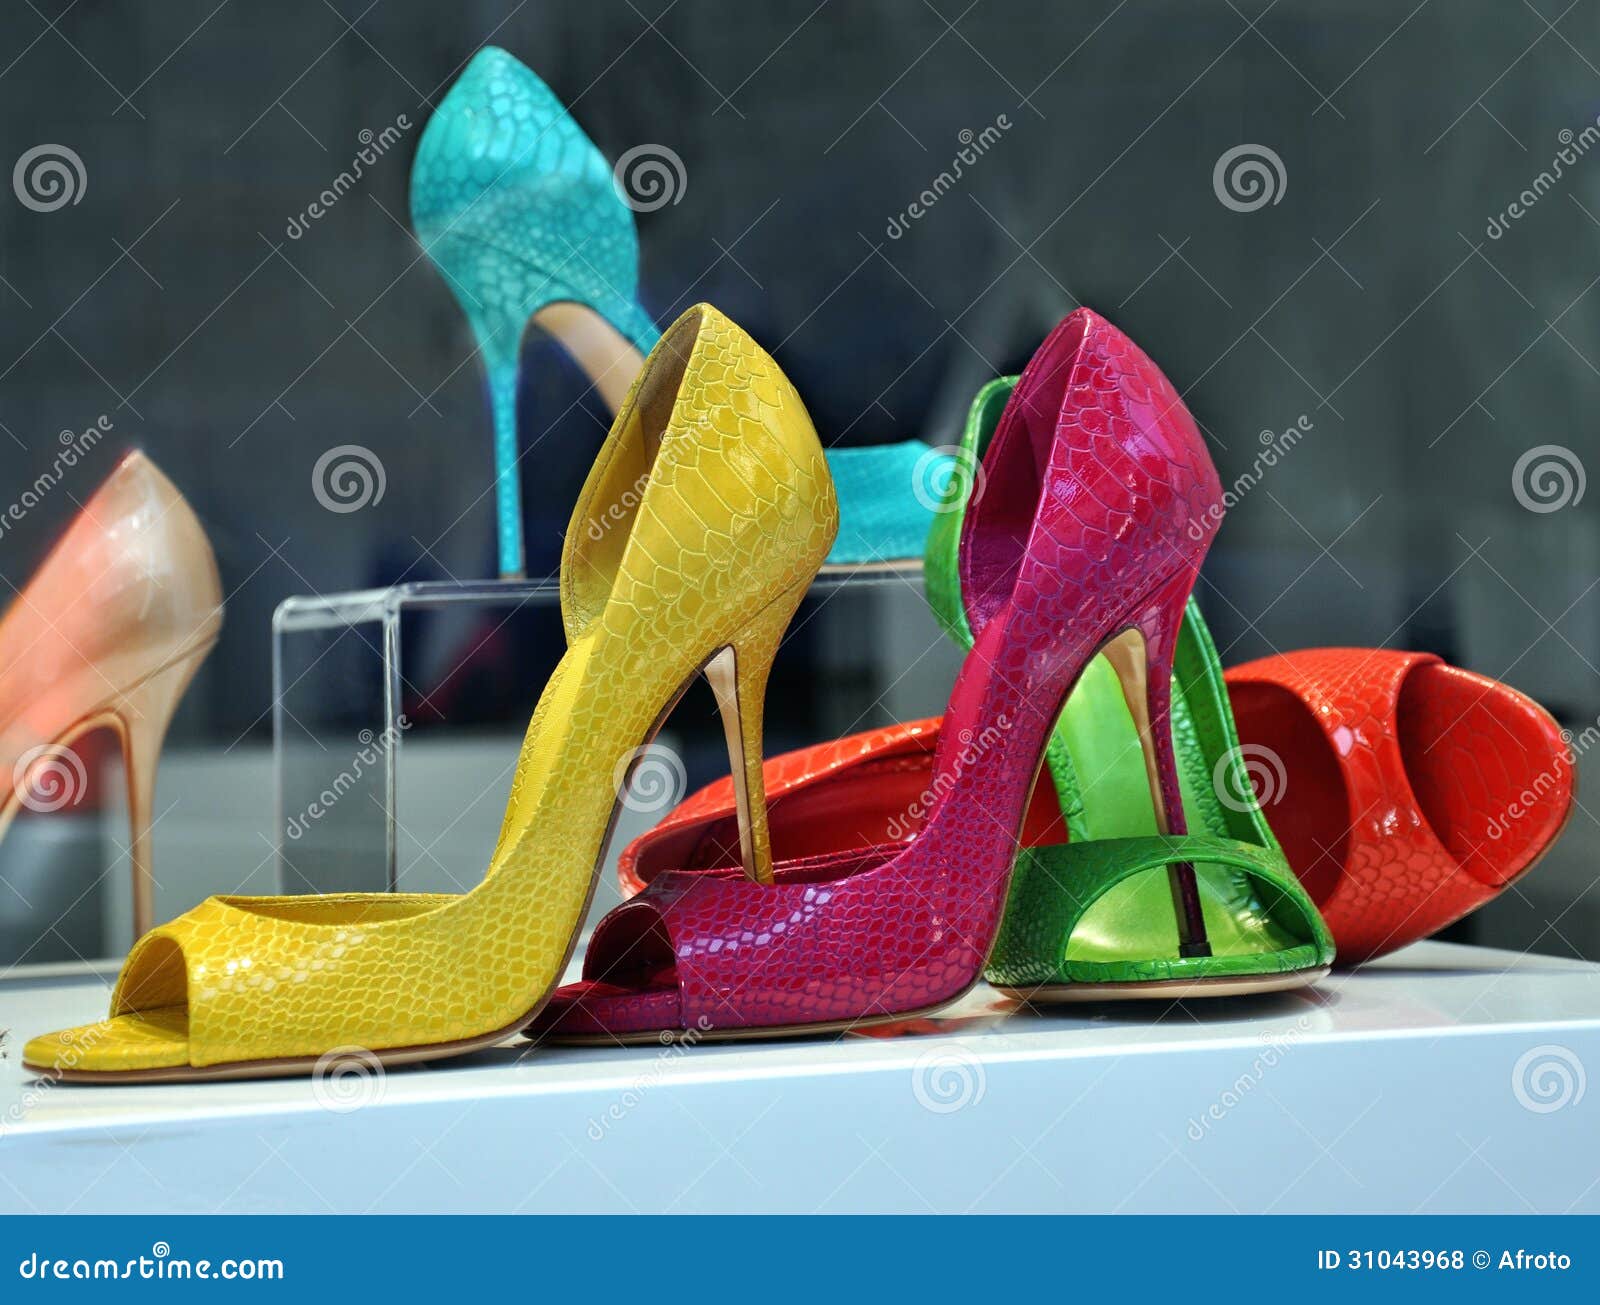 Colorful shoes stock photo. Image of style, design, sale - 31043968